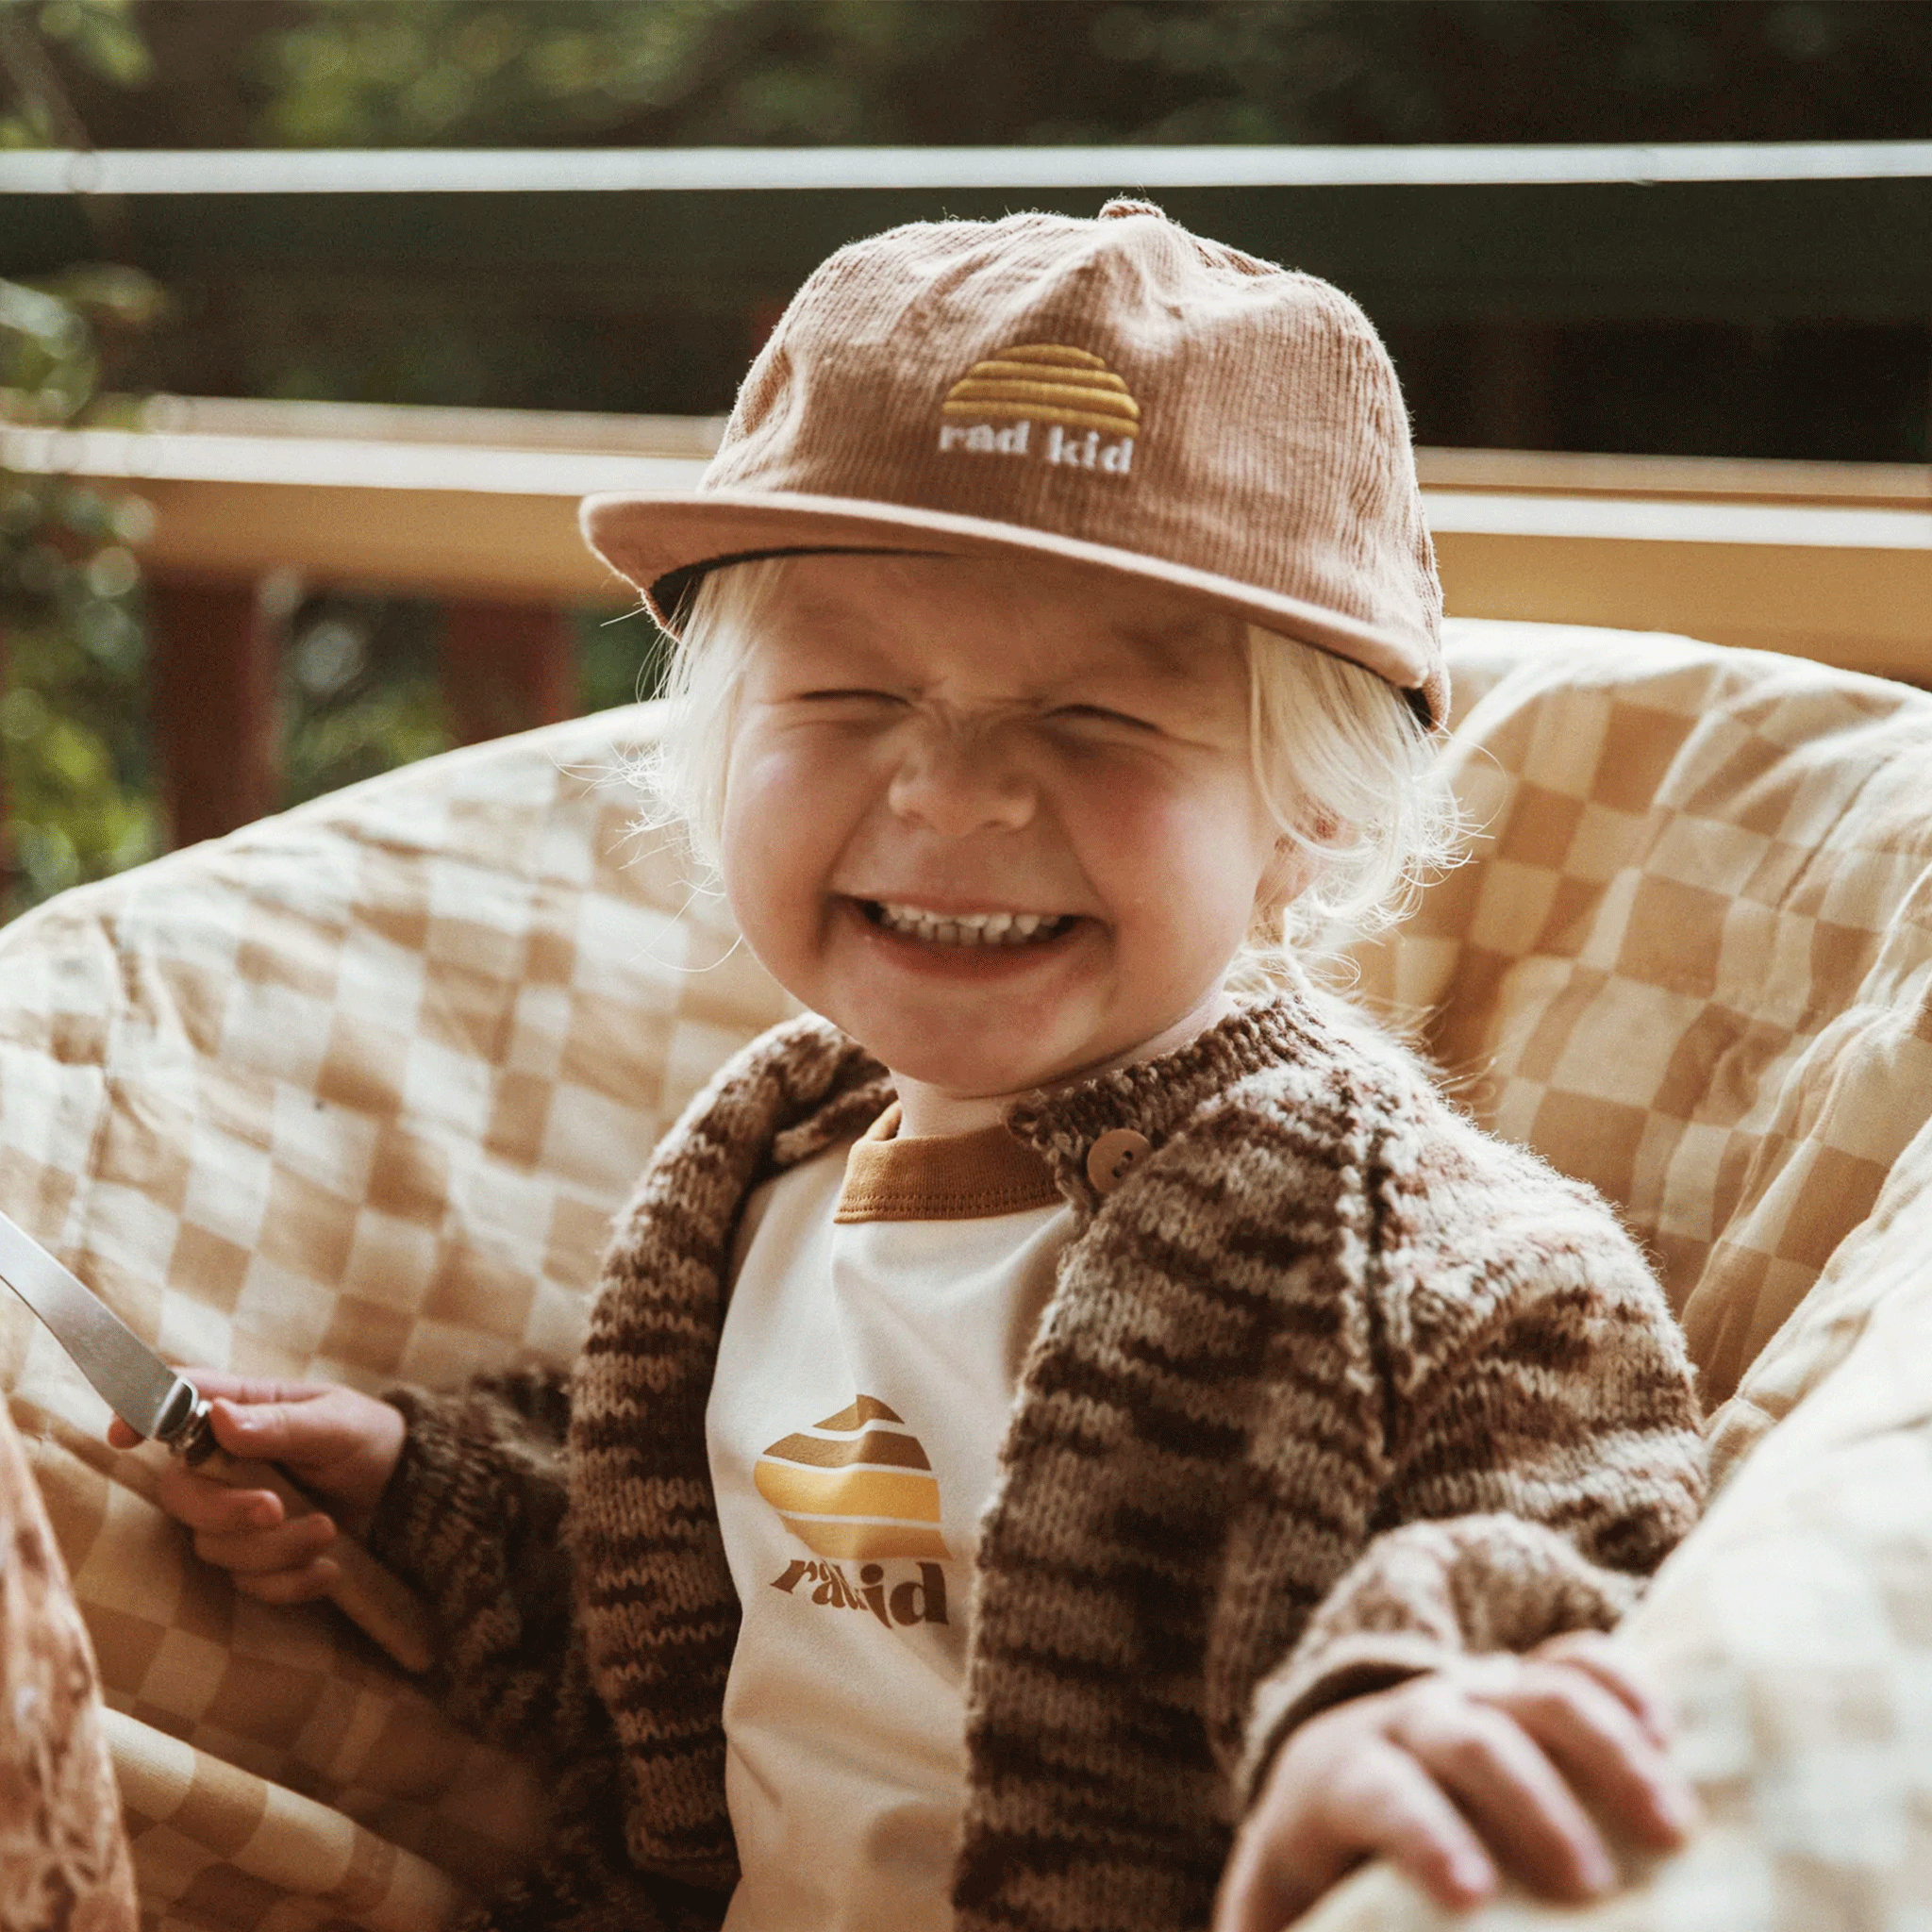 A children's model wearing a tan corduroy hat with a yellow sun logo and white text below it that reads, "rad kid".